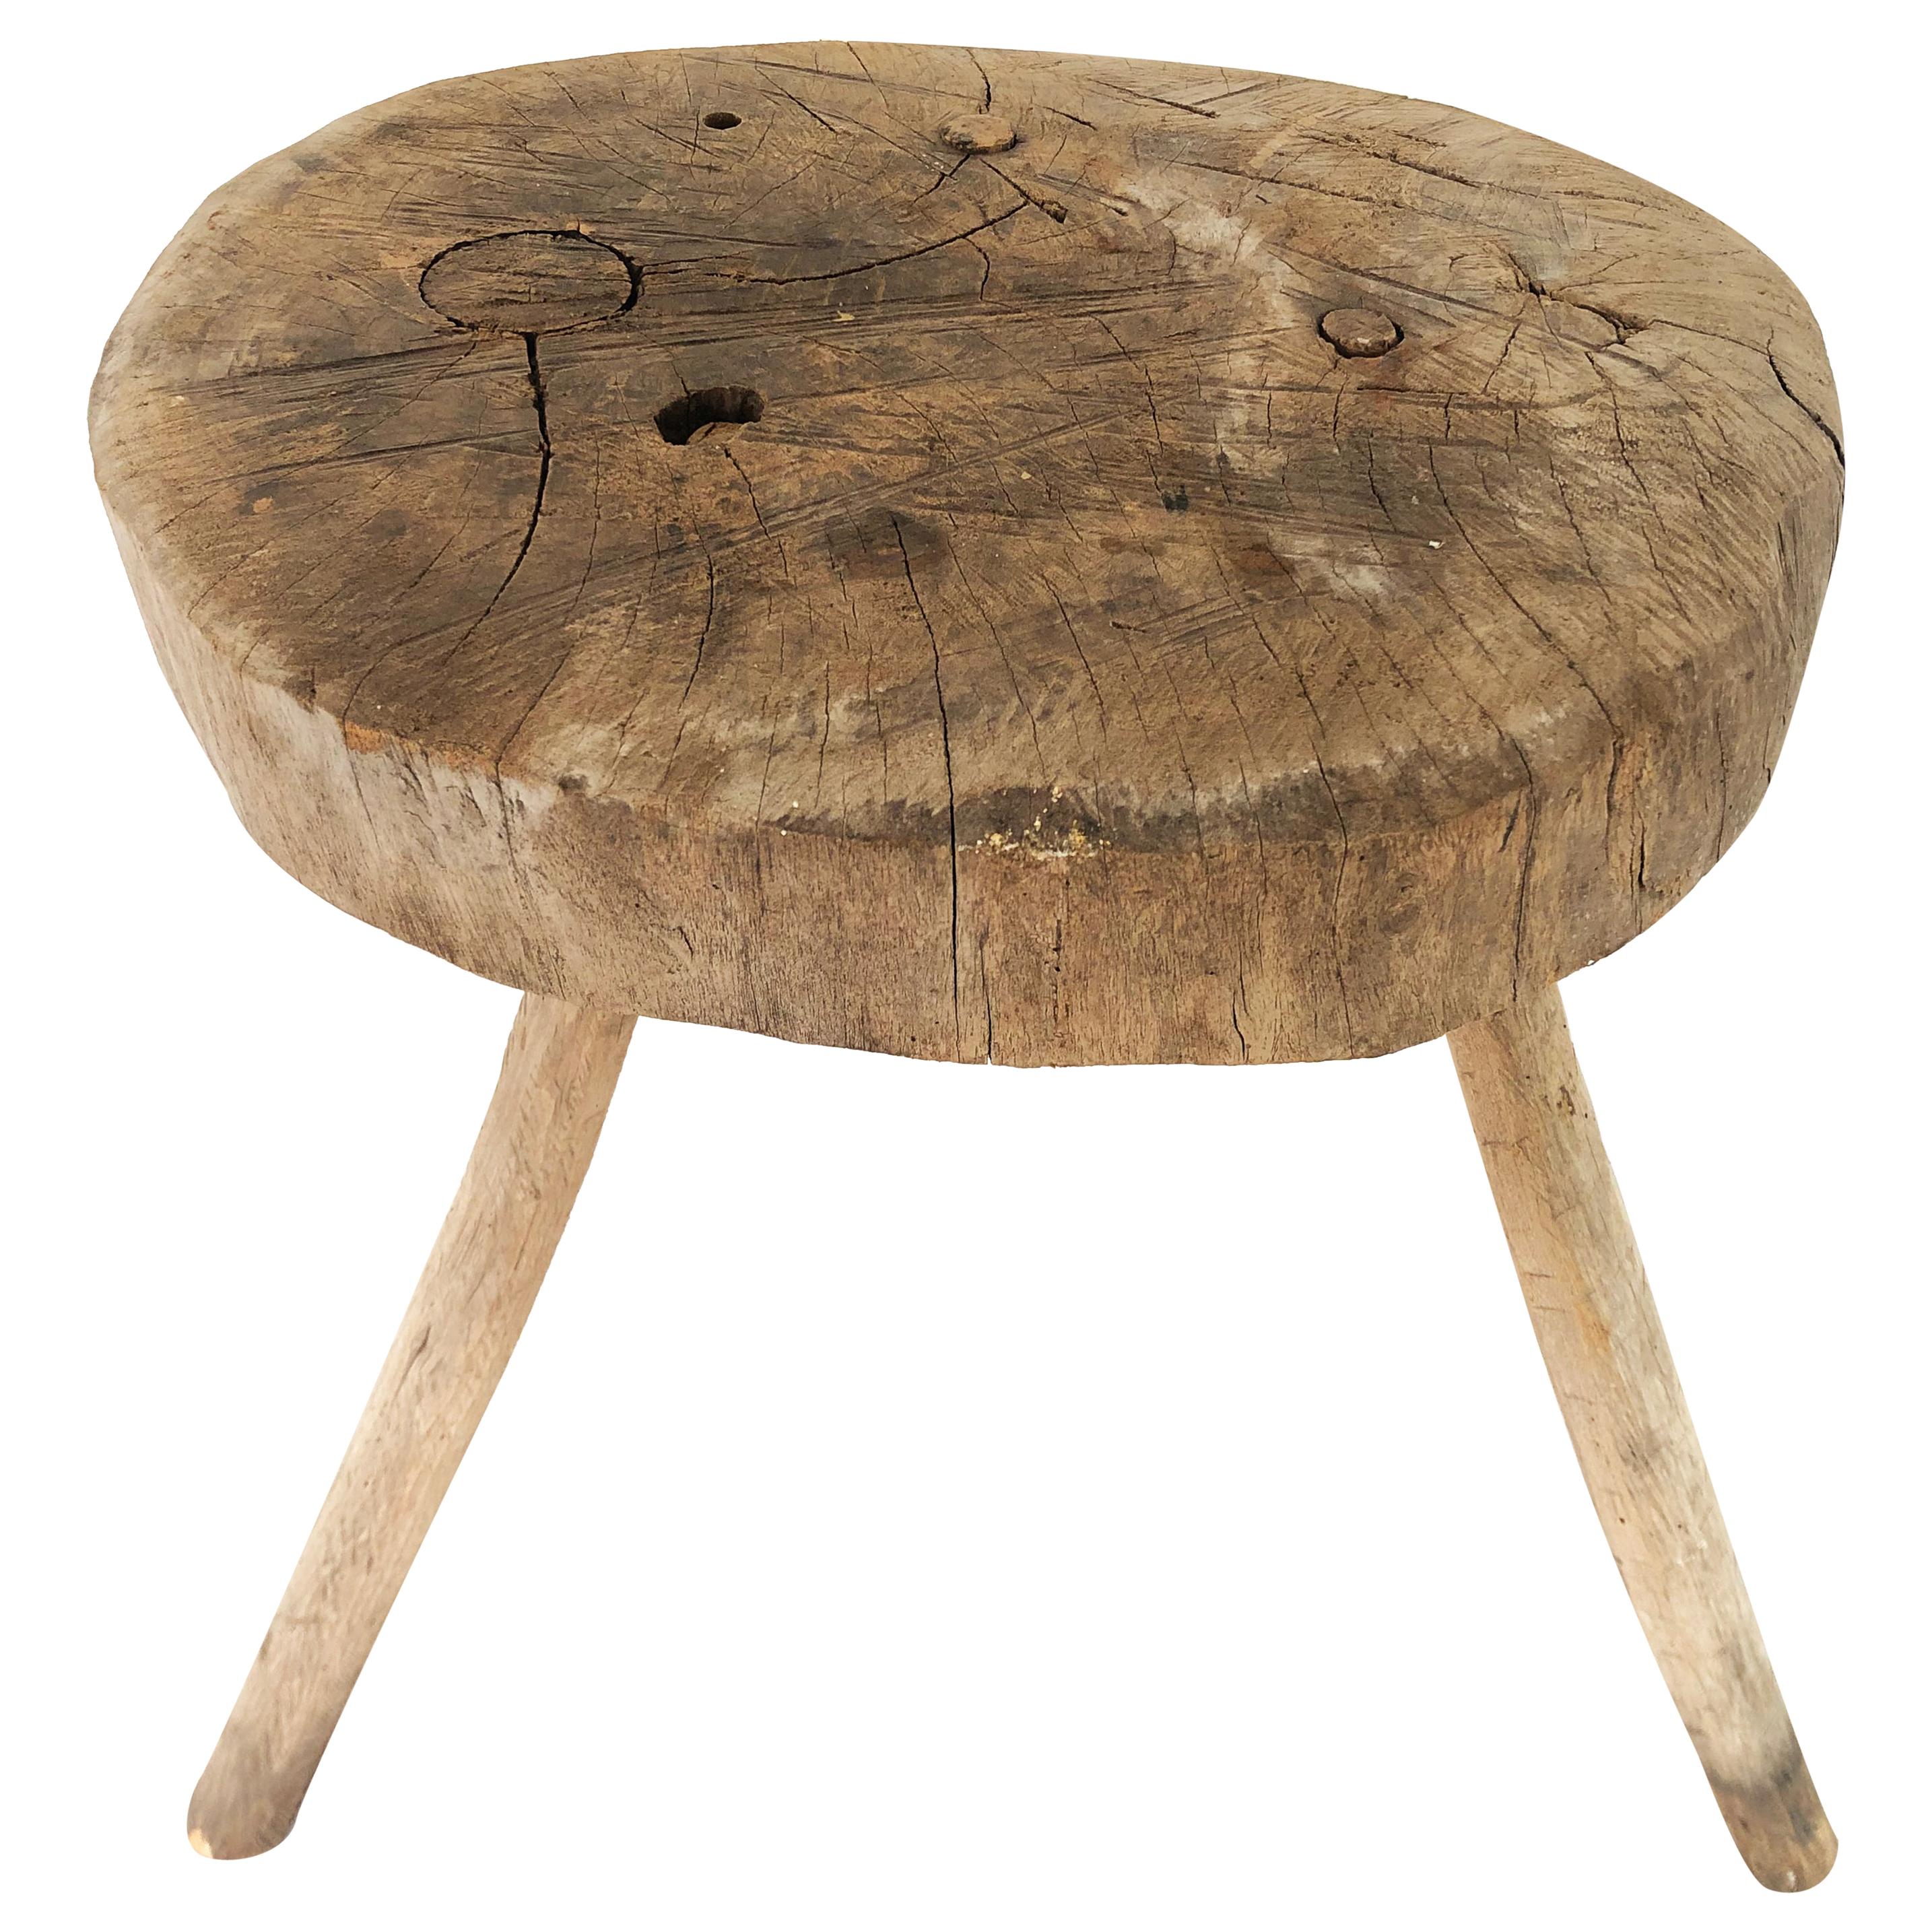 Late 19th Century Mezquite Milking Wood Stool with Thick Round Top